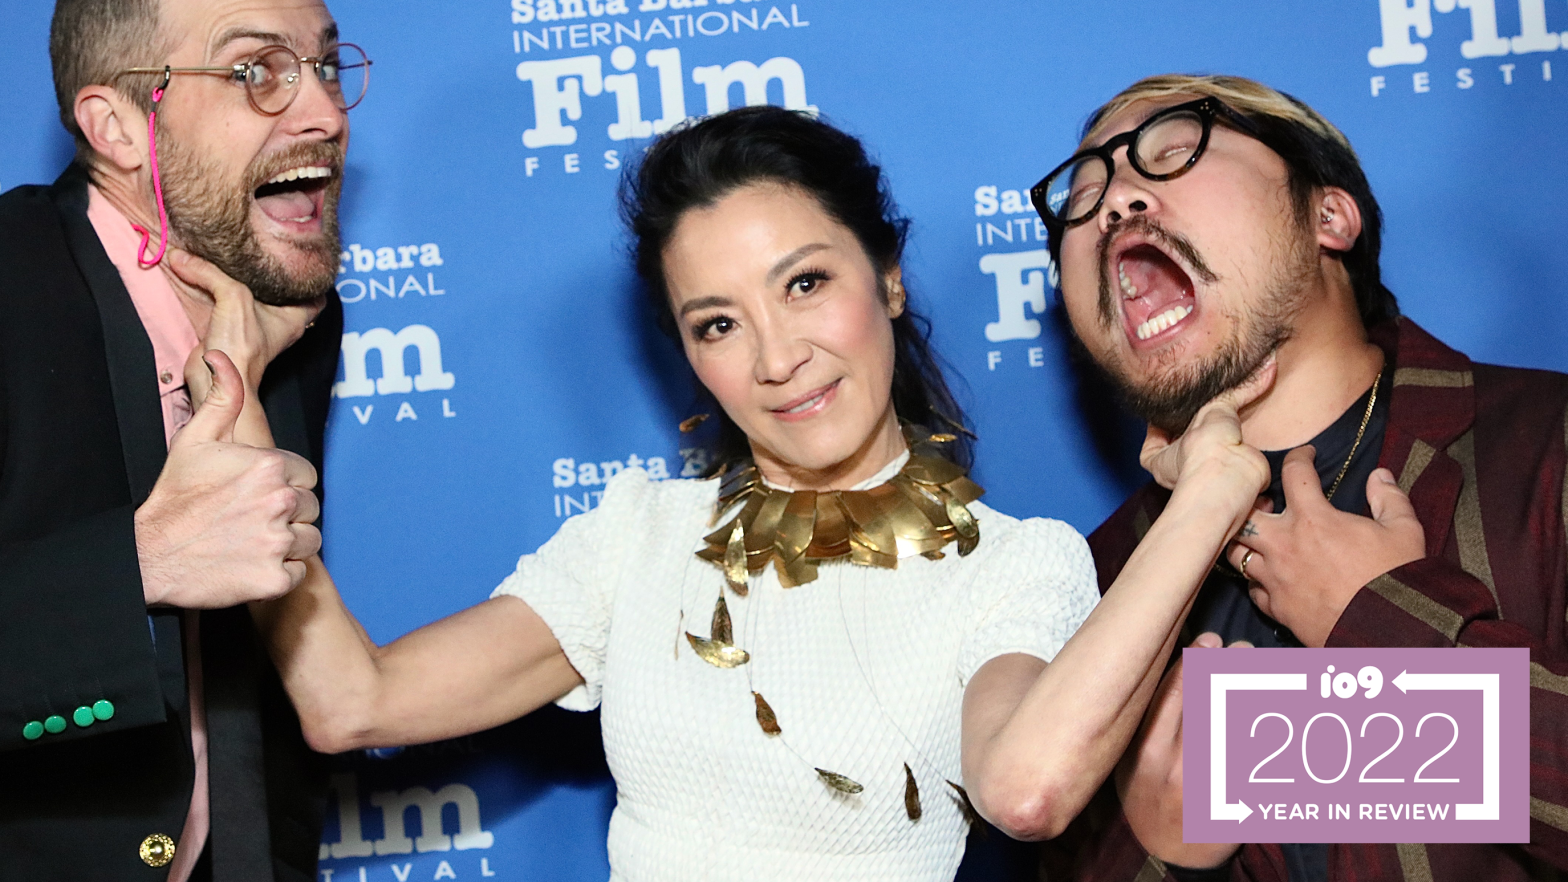 Michelle Yeoh with the Daniels (Daniel Scheinert and Daniel Kwan), directors of Everything Everywhere All at Once. (Image: Robin L Marshall / Stringer, Getty Images)